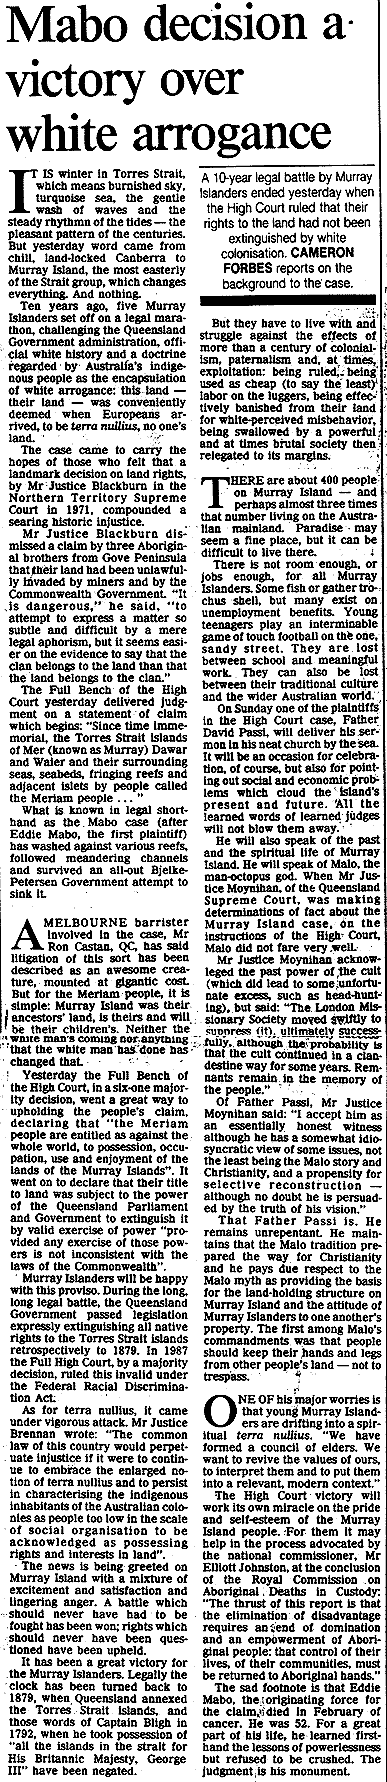 Mabo decision a victory over white arrogance, 1993